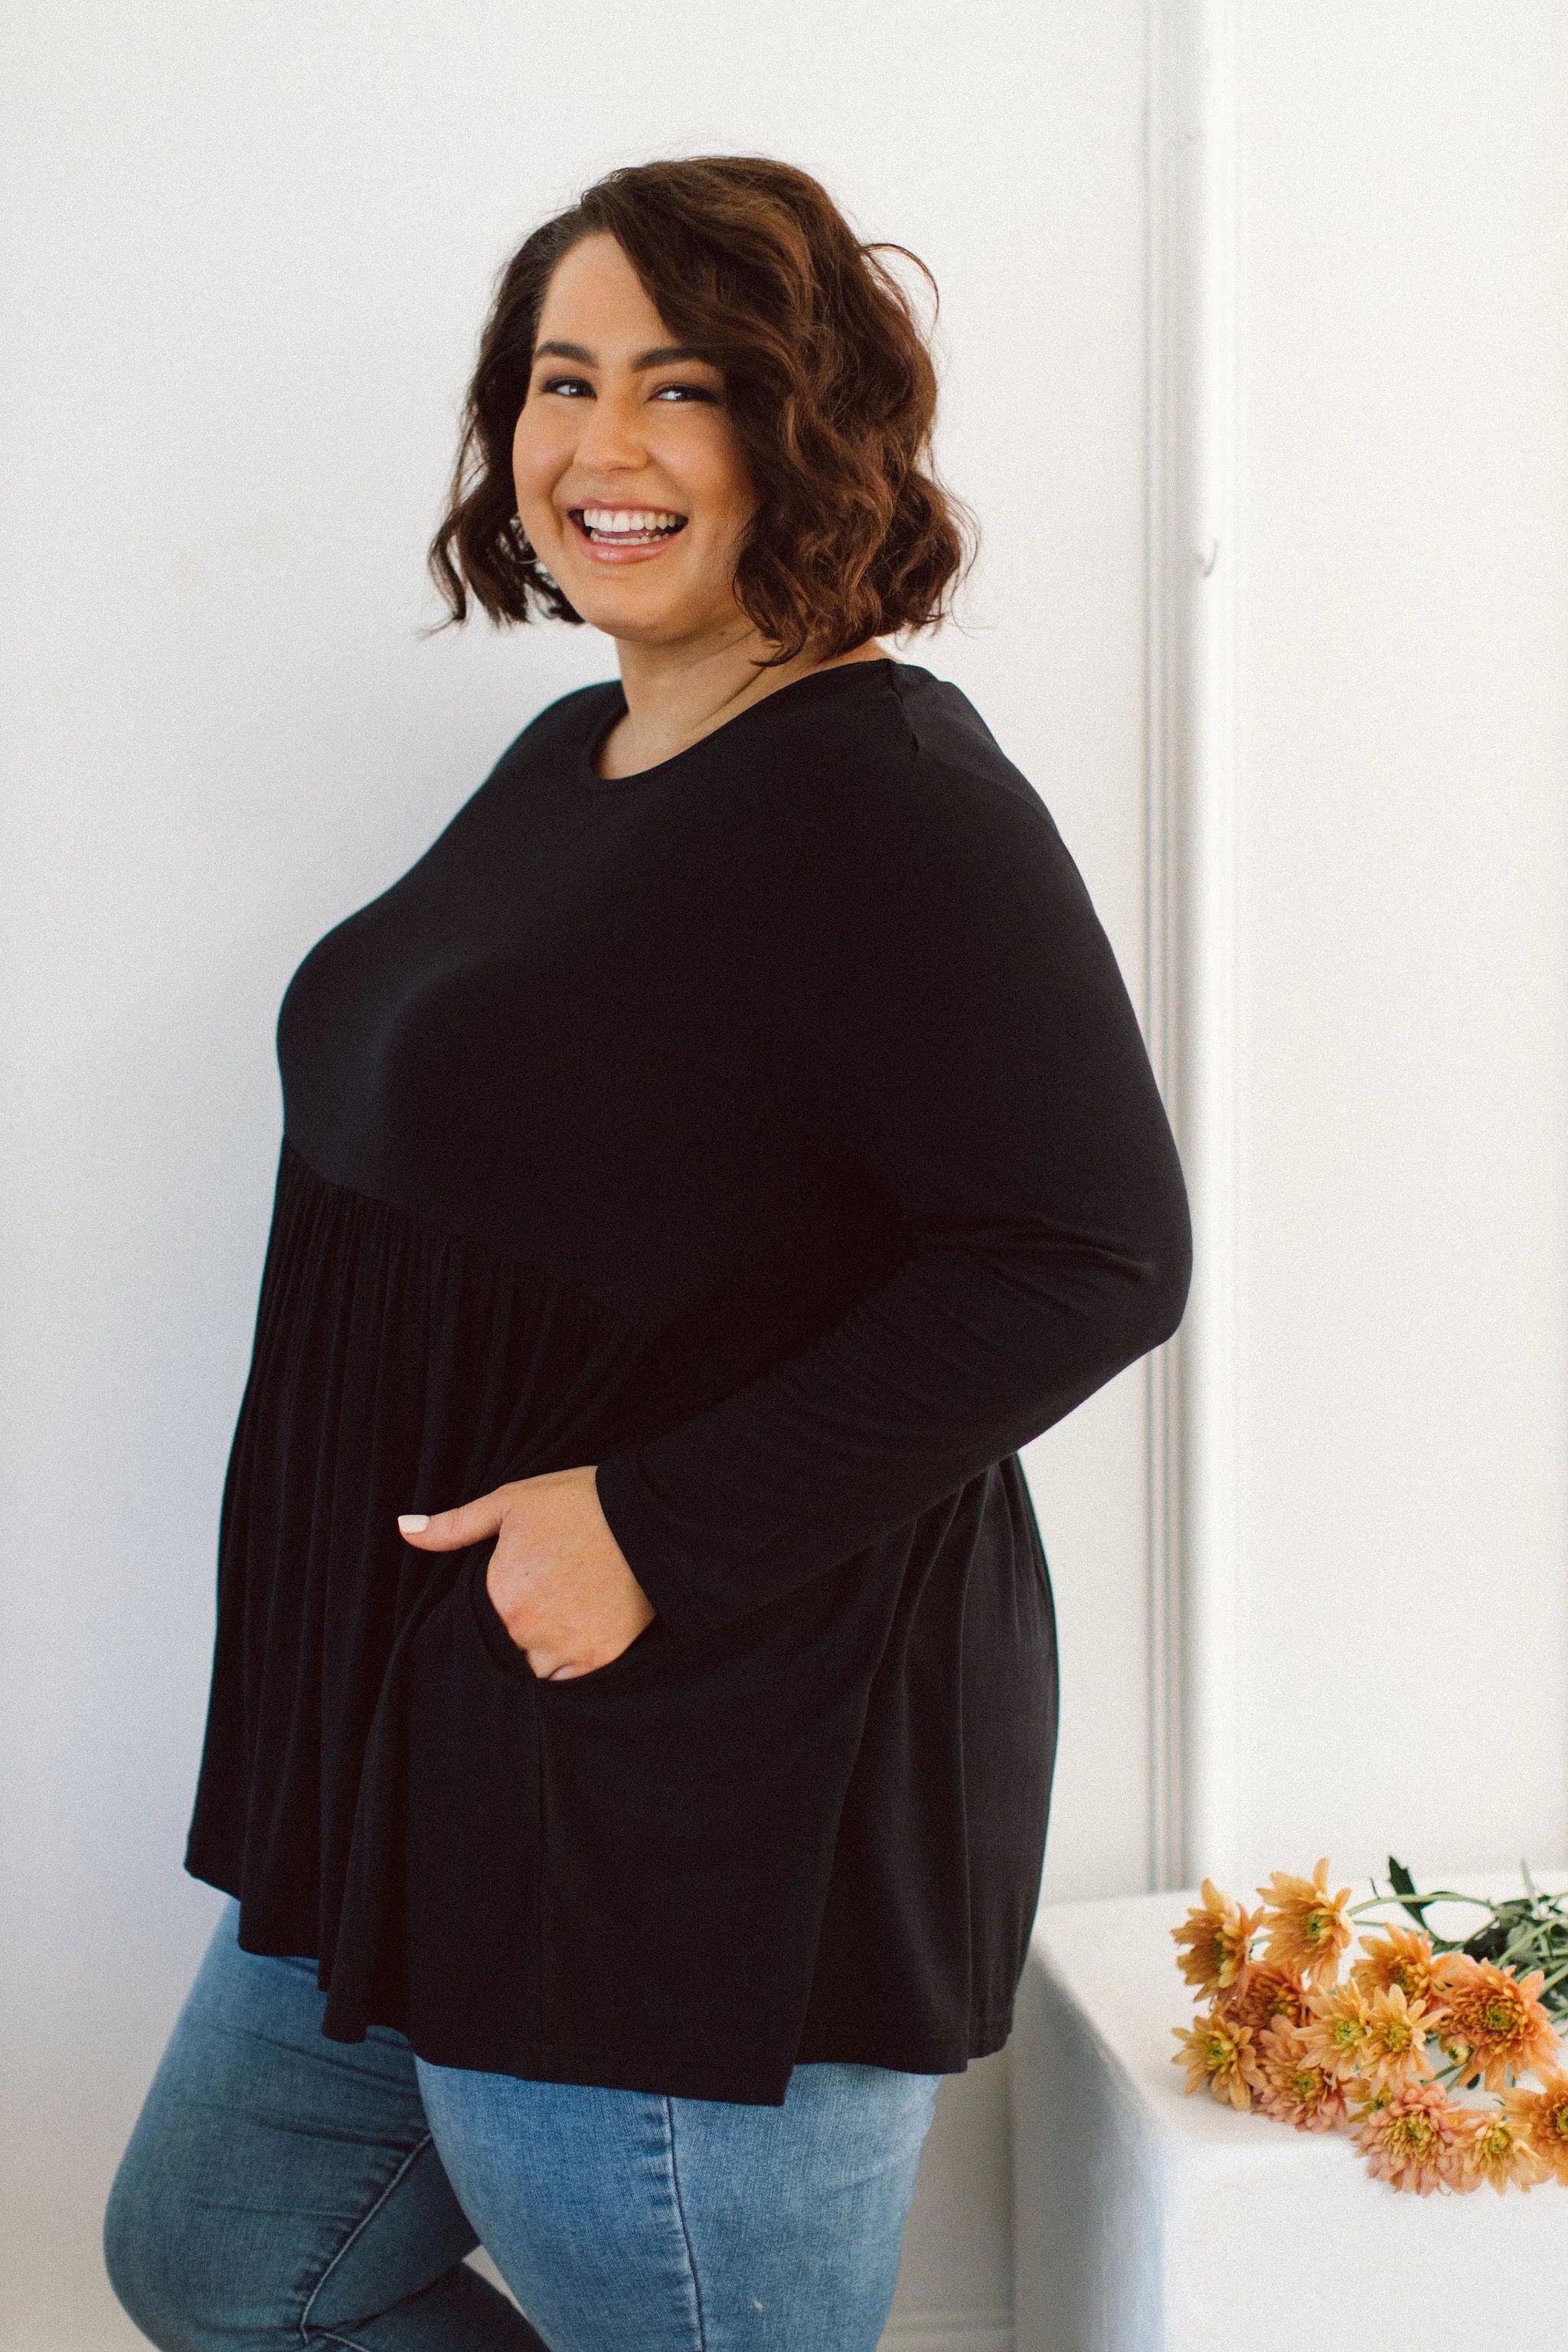 Plus Size clothing,  women modeling Curvy Womens Tops, Lucy Long Sleeve Top in black